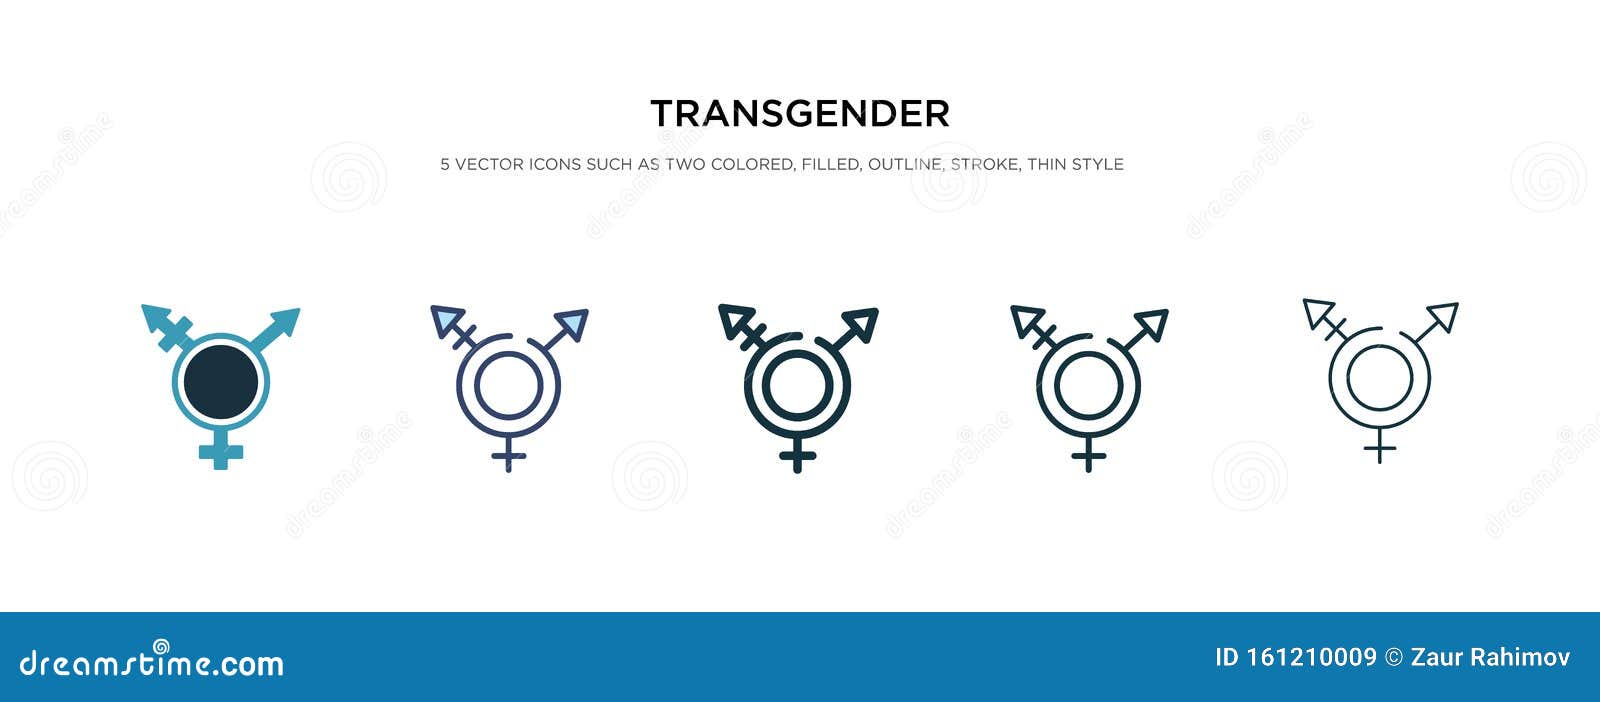 Transgender Icon in Different Style Vector Illustration. Two Colored ...